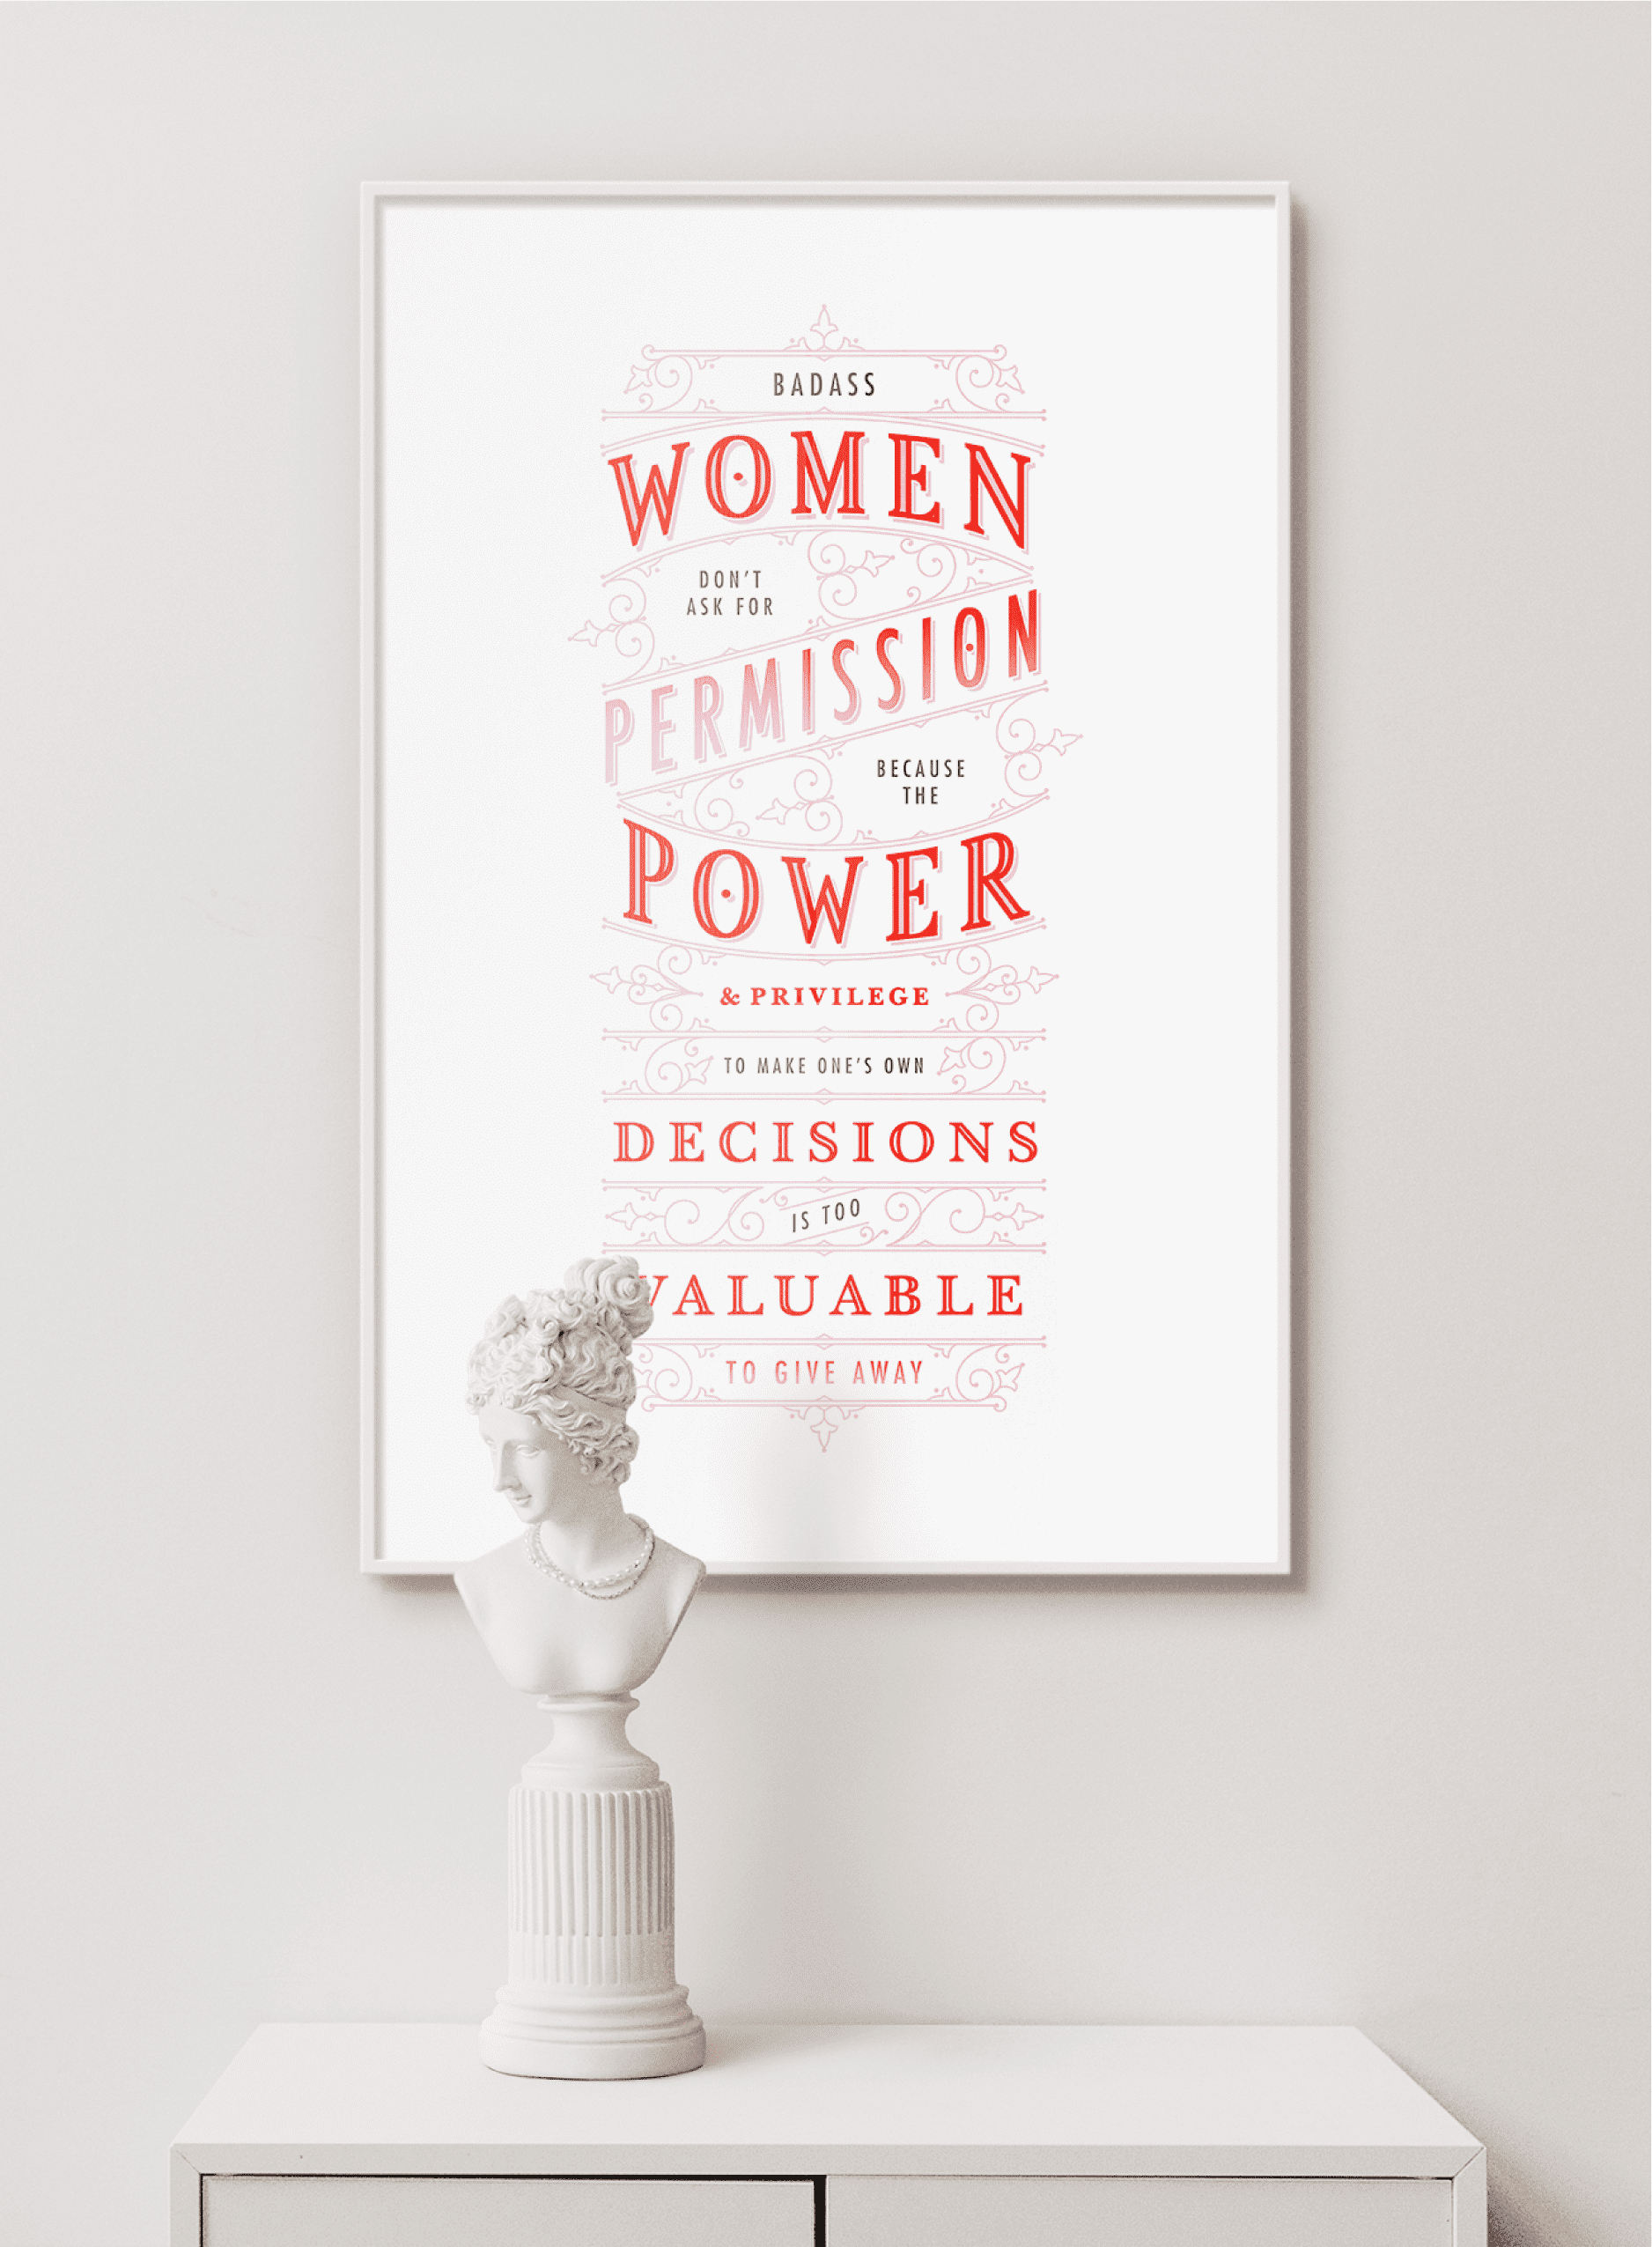 quote art print that says badass women don't ask for permission because the power and privilege to make ones own decisions is too valuable to give away